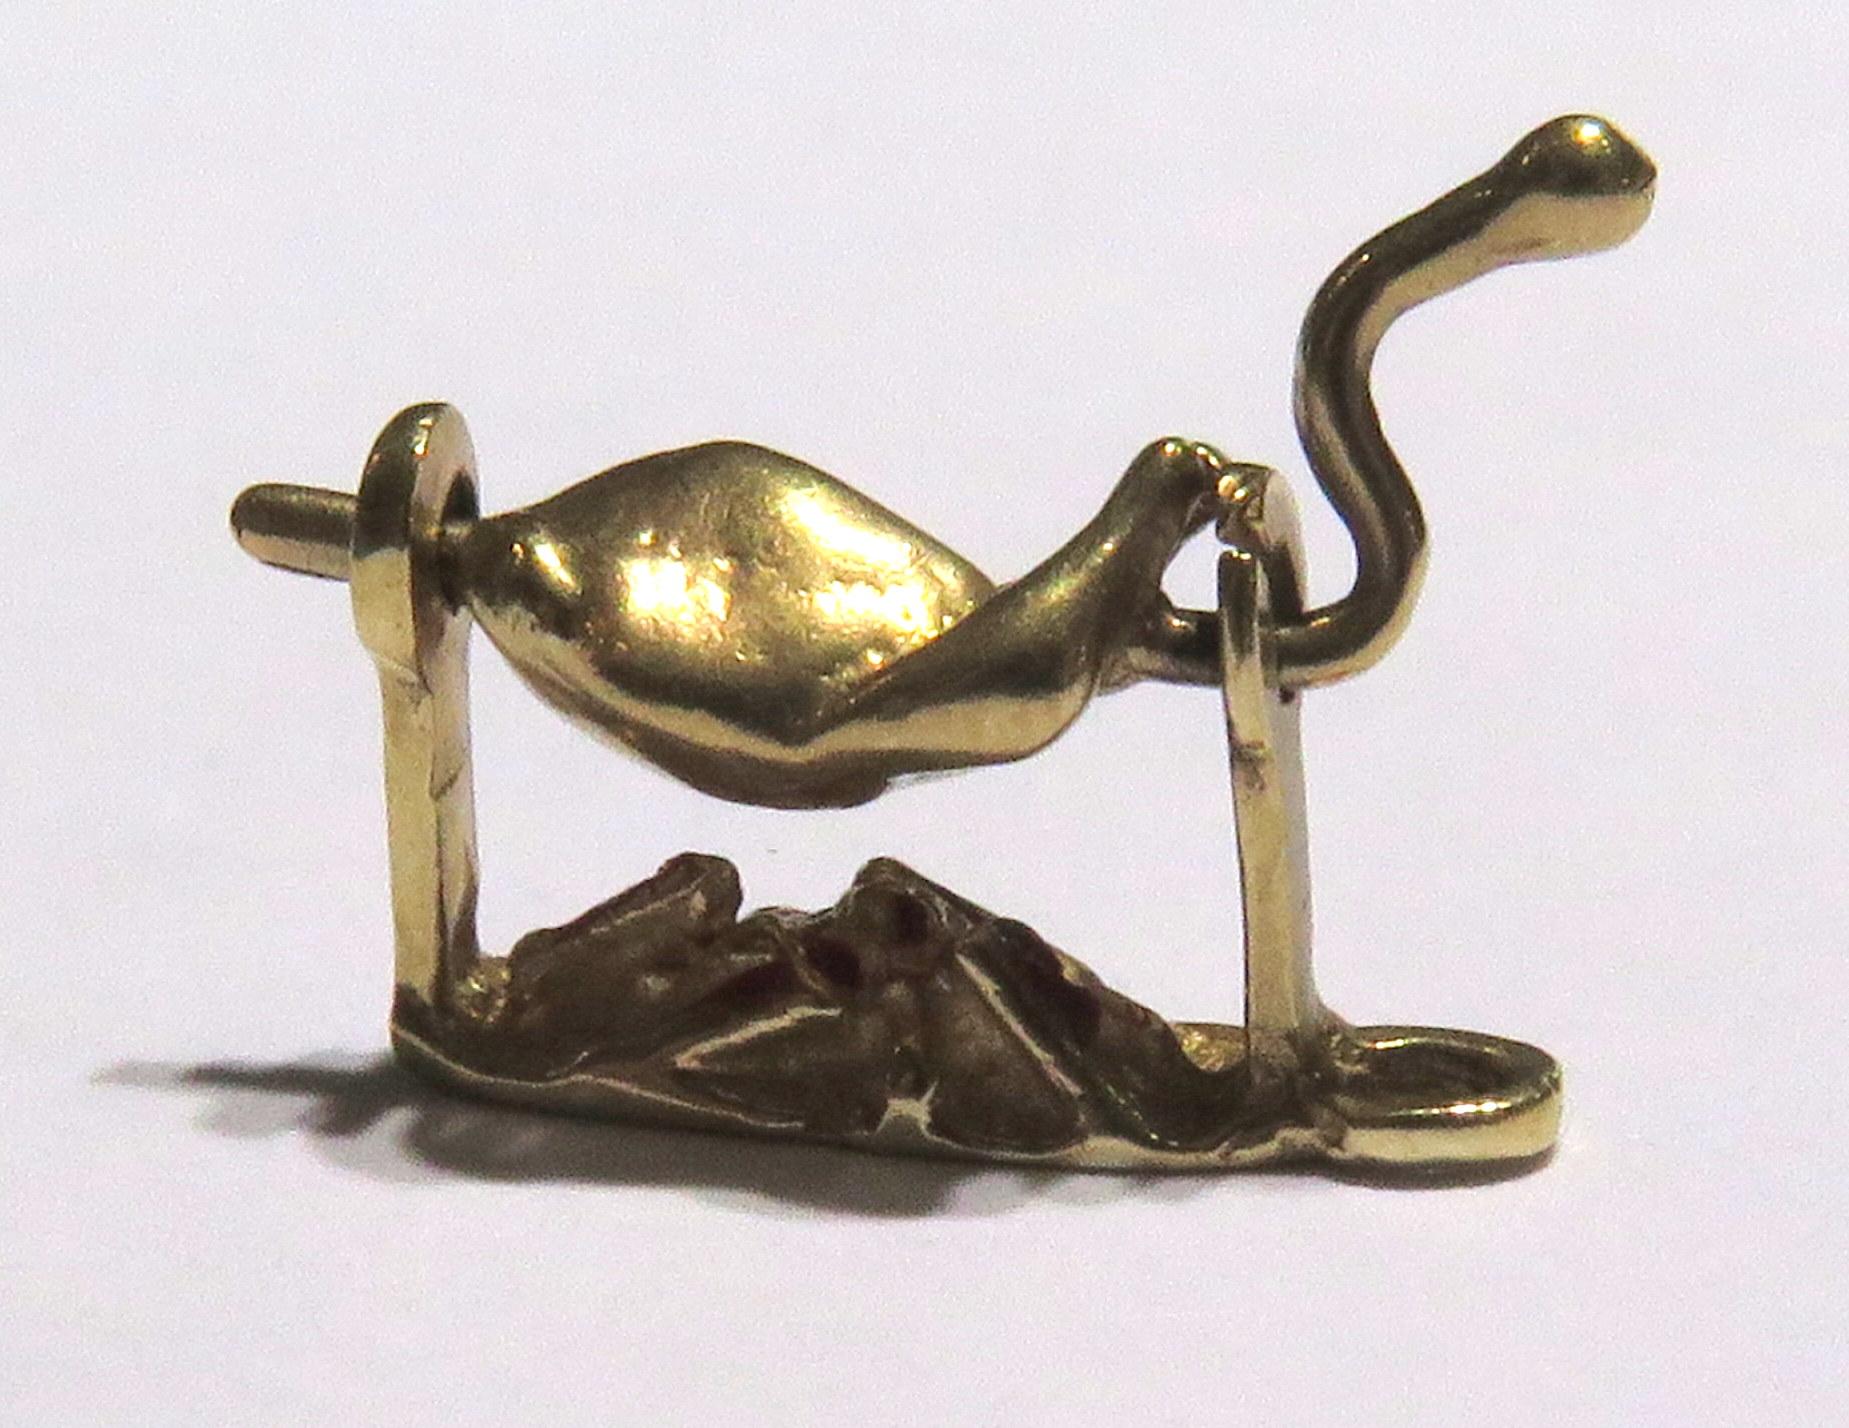 This tasty little treat is sure to satisfy your hunger for the most unique charms. It spins all around so it will cook evenly. It is 14 karat gold.
This charm measures 3/4 inch across the longest section by 1/2 inch high 
This tasty chicken weighs